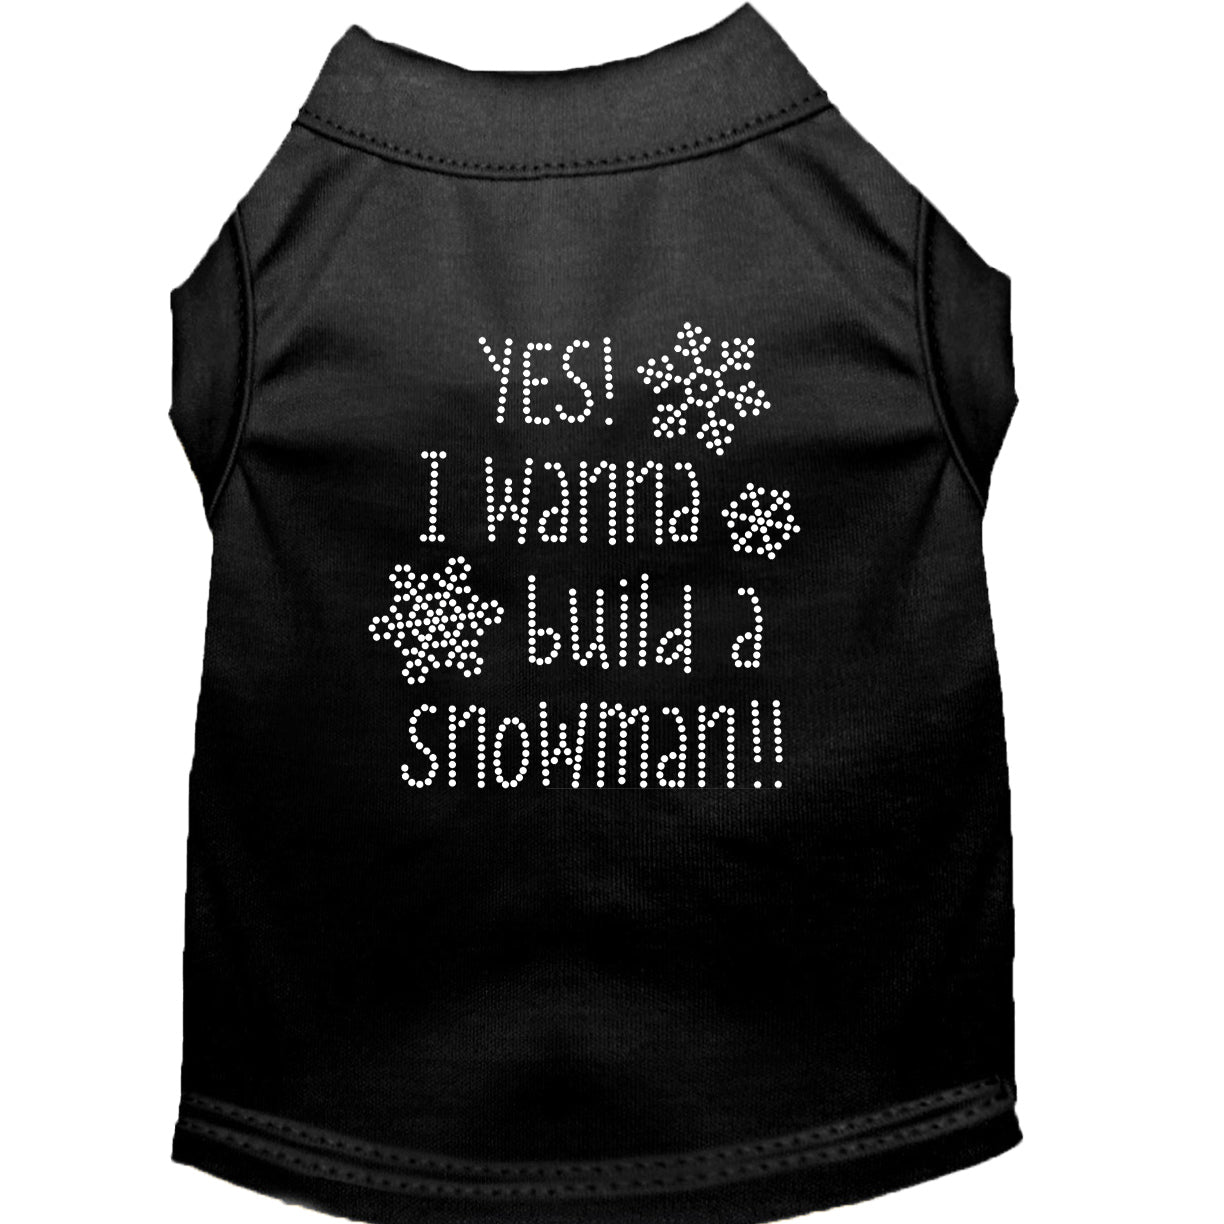 Yes I Want To Build A Snowman Rhinestone Shirts for Cats and Dogs